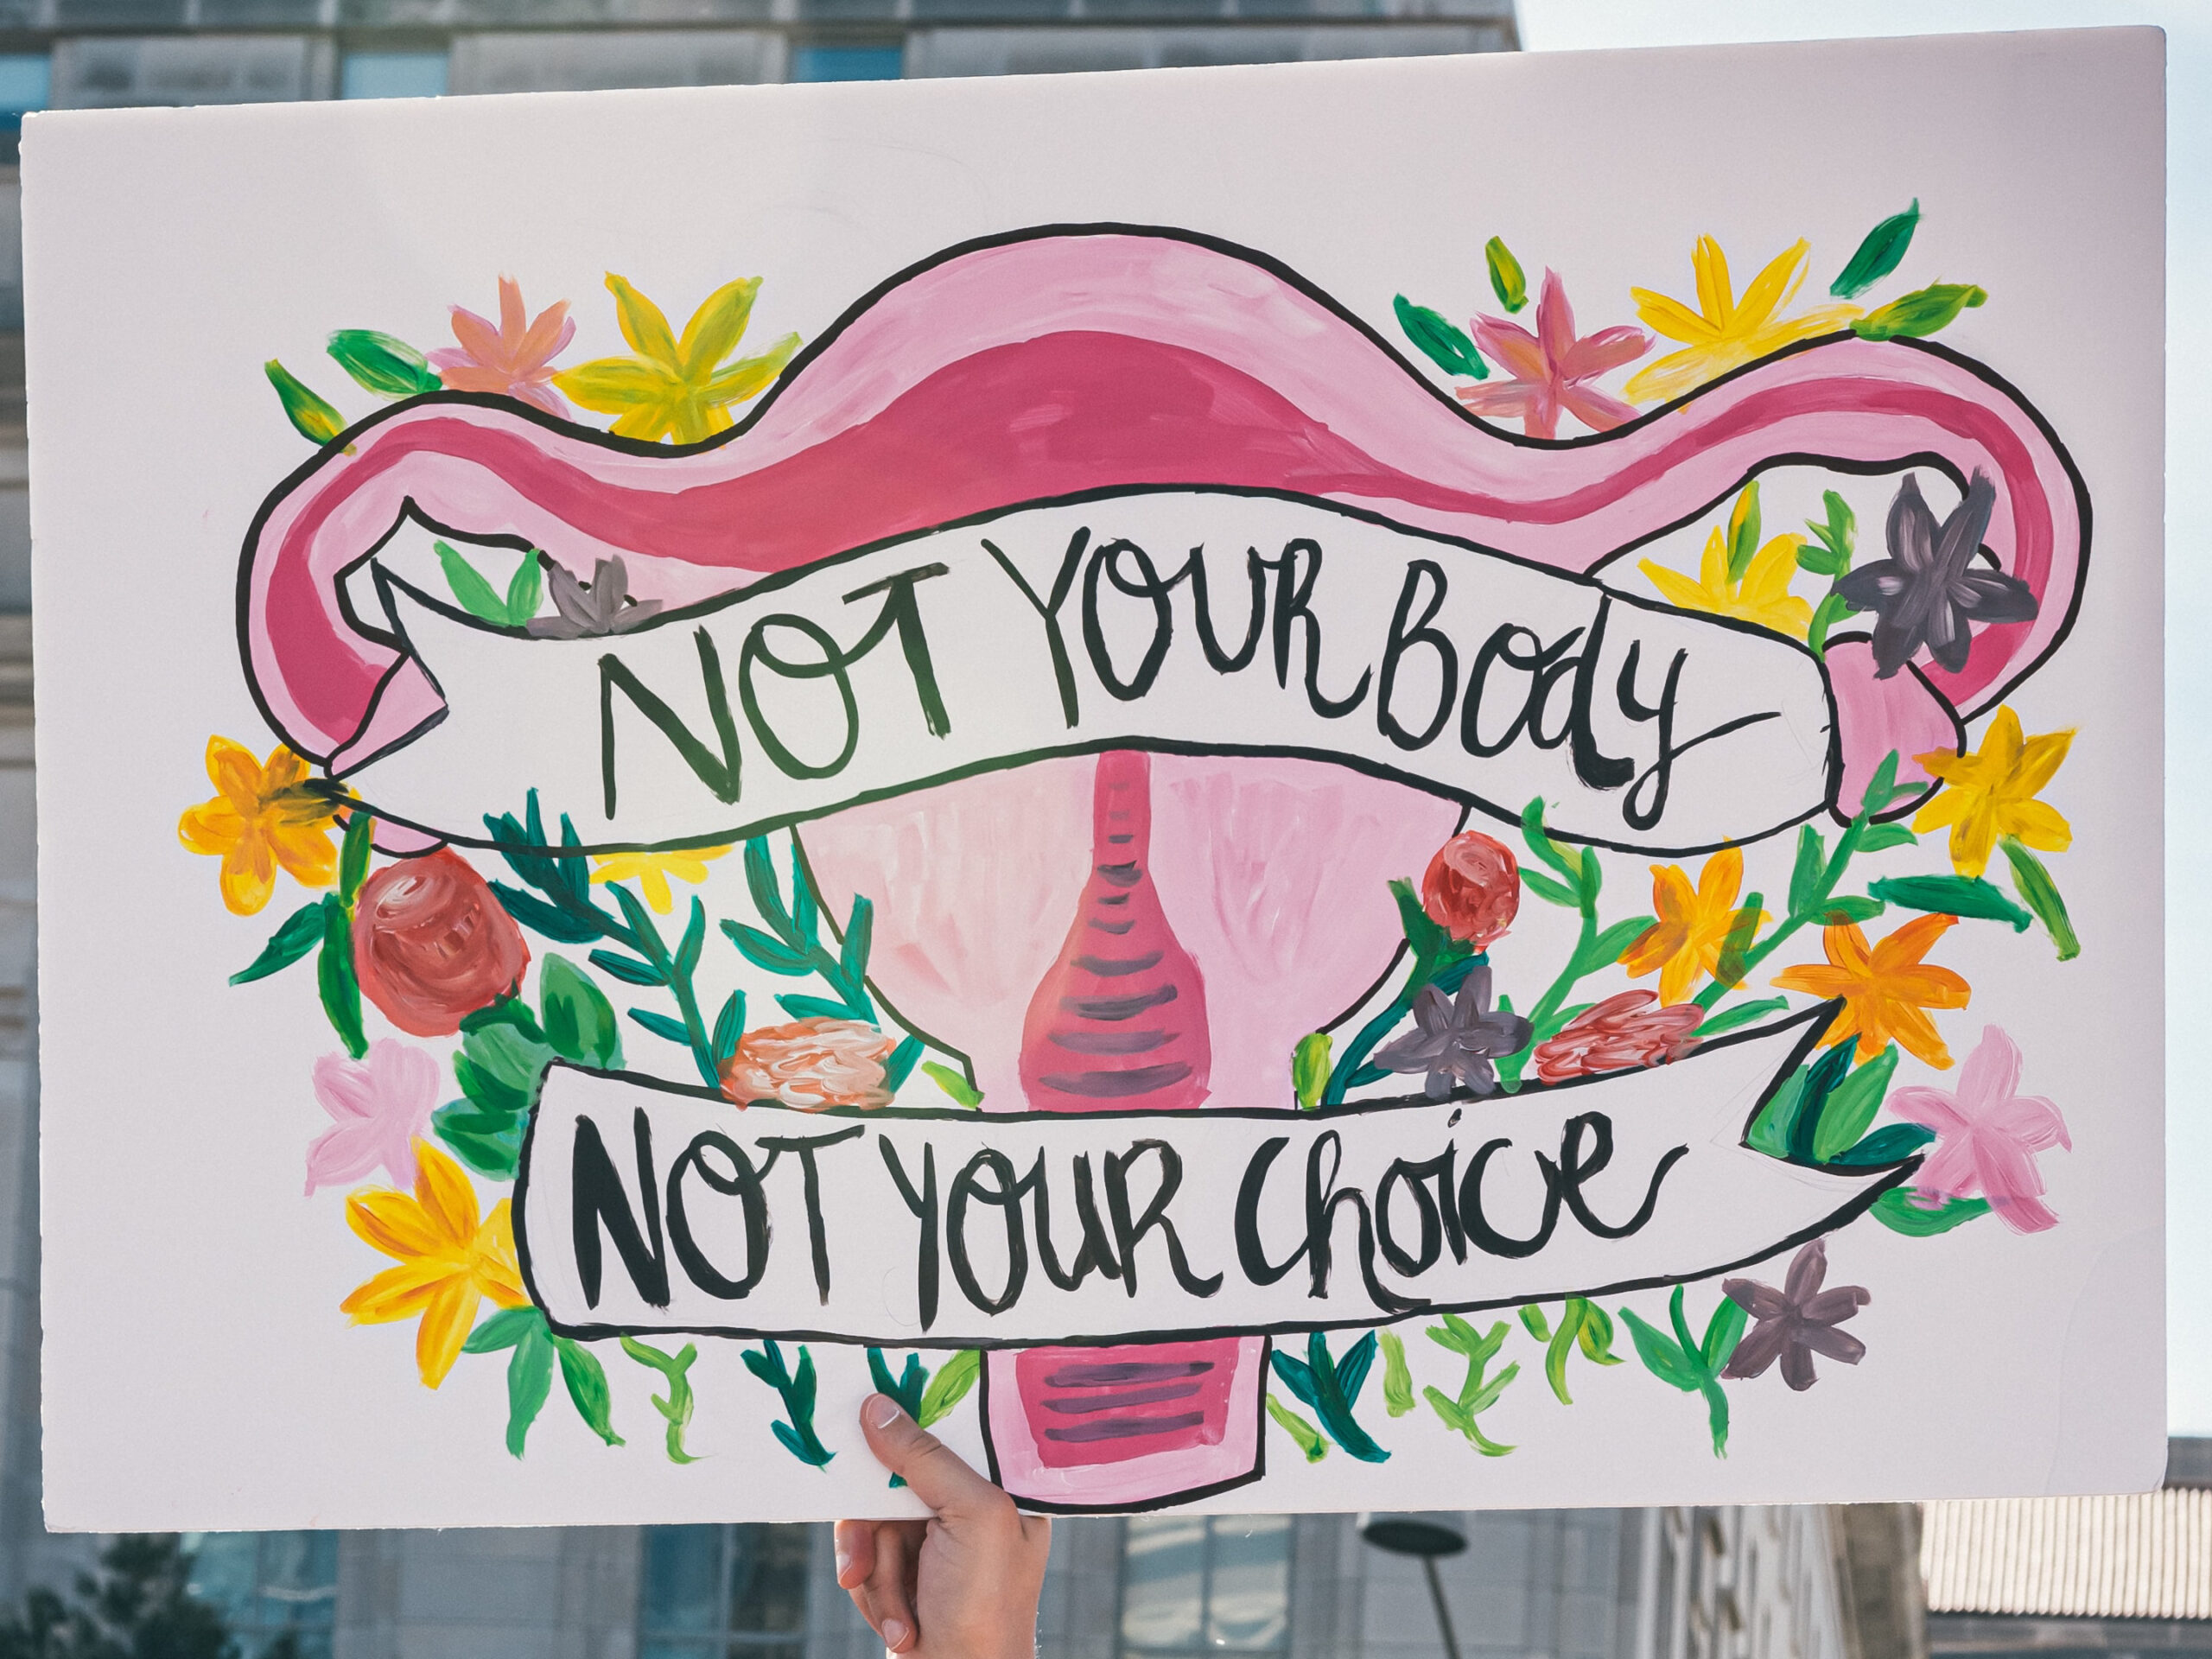 Canadians long overdue for a policy protecting abortion